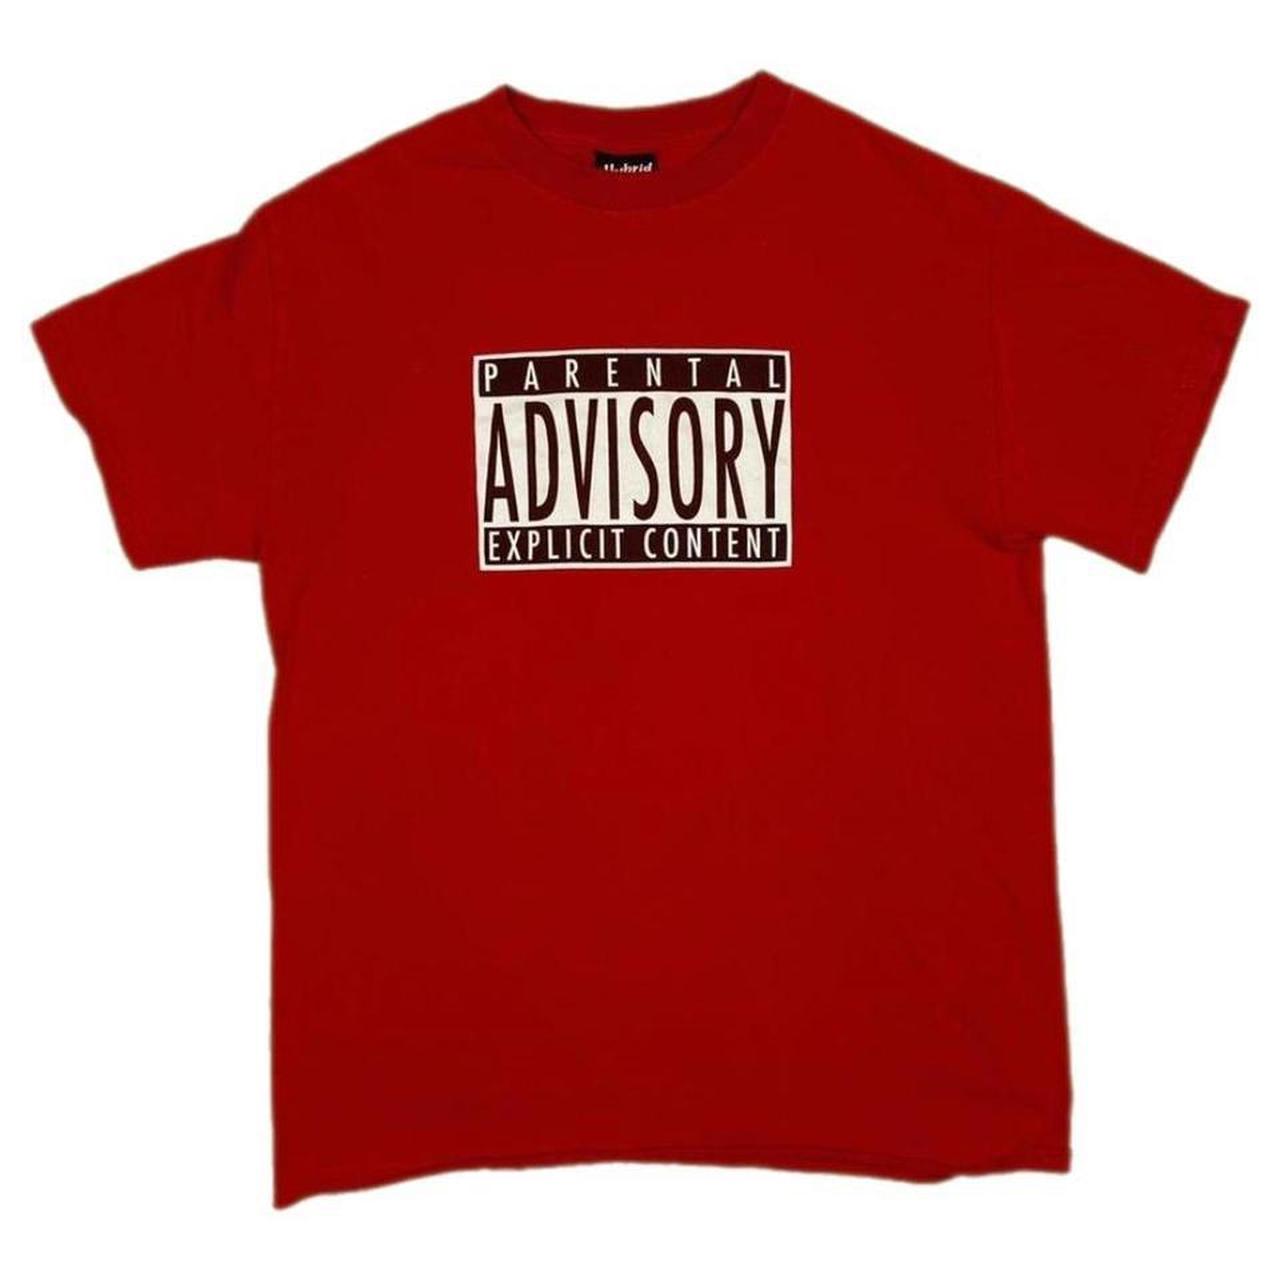 Hybrid Apparel Men's Red and Black T-shirt